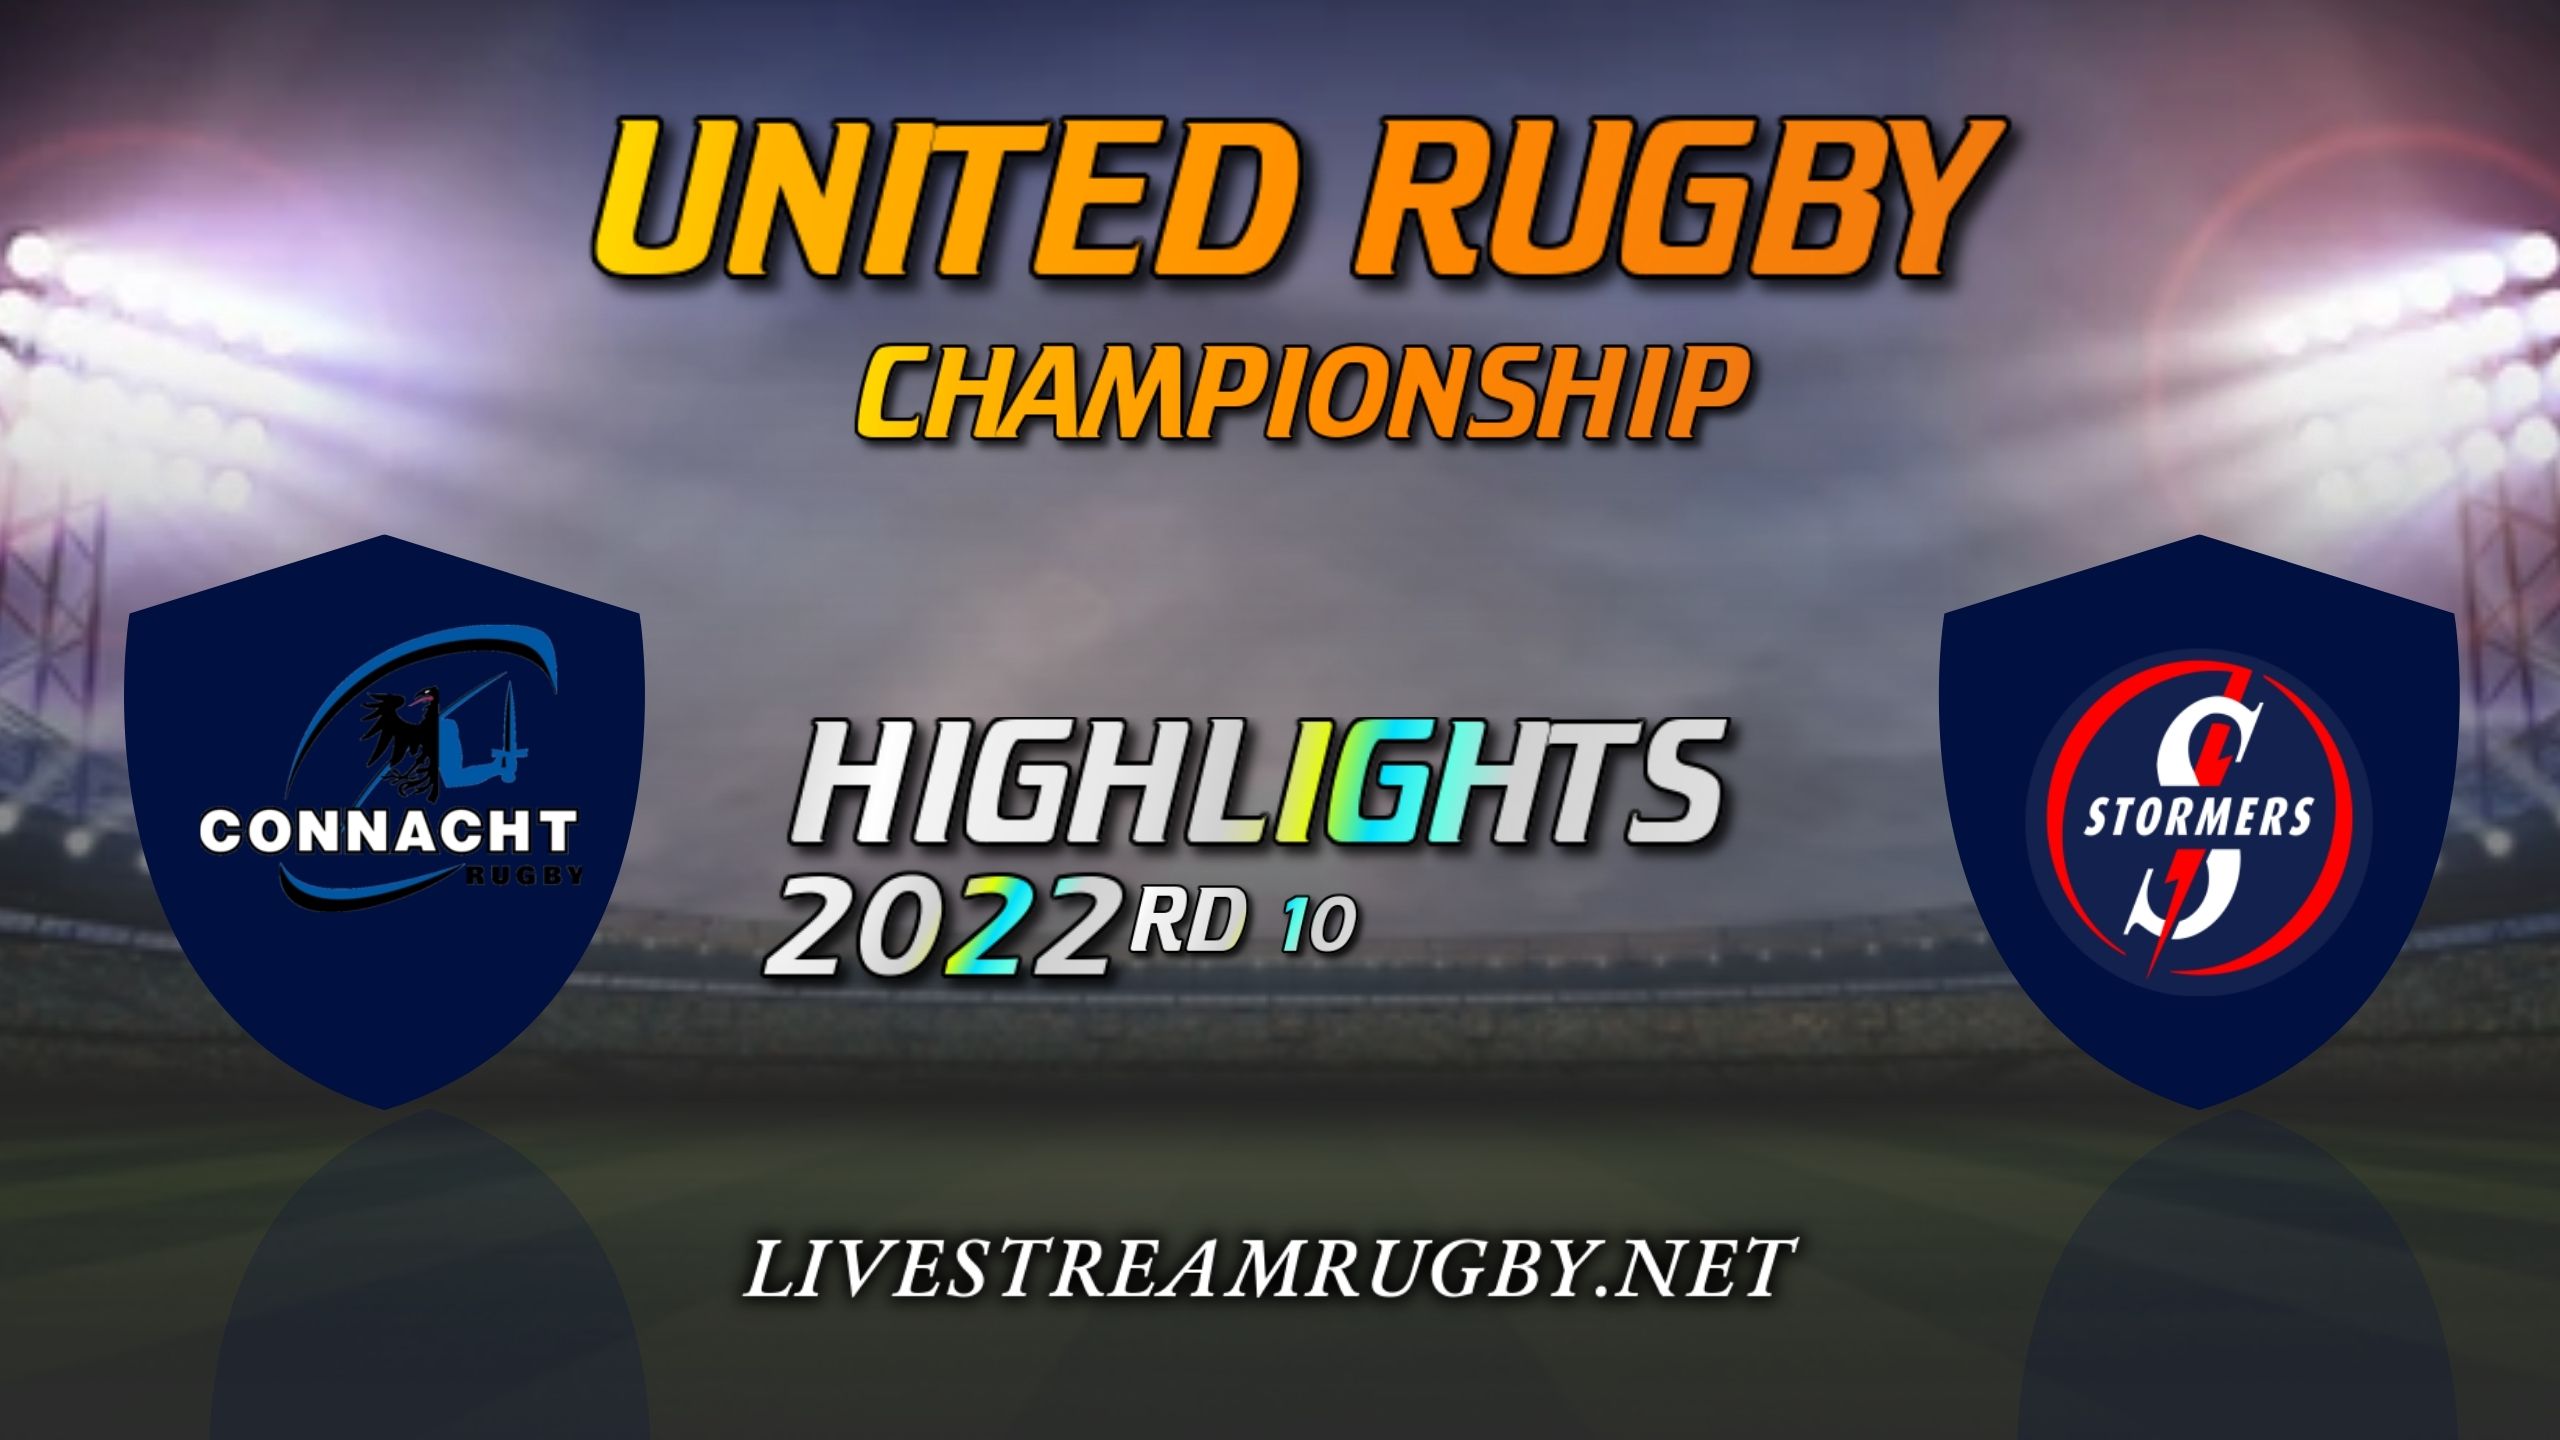 Connacht Vs Stormers Highlights 2022 Rd 10 United Rugby